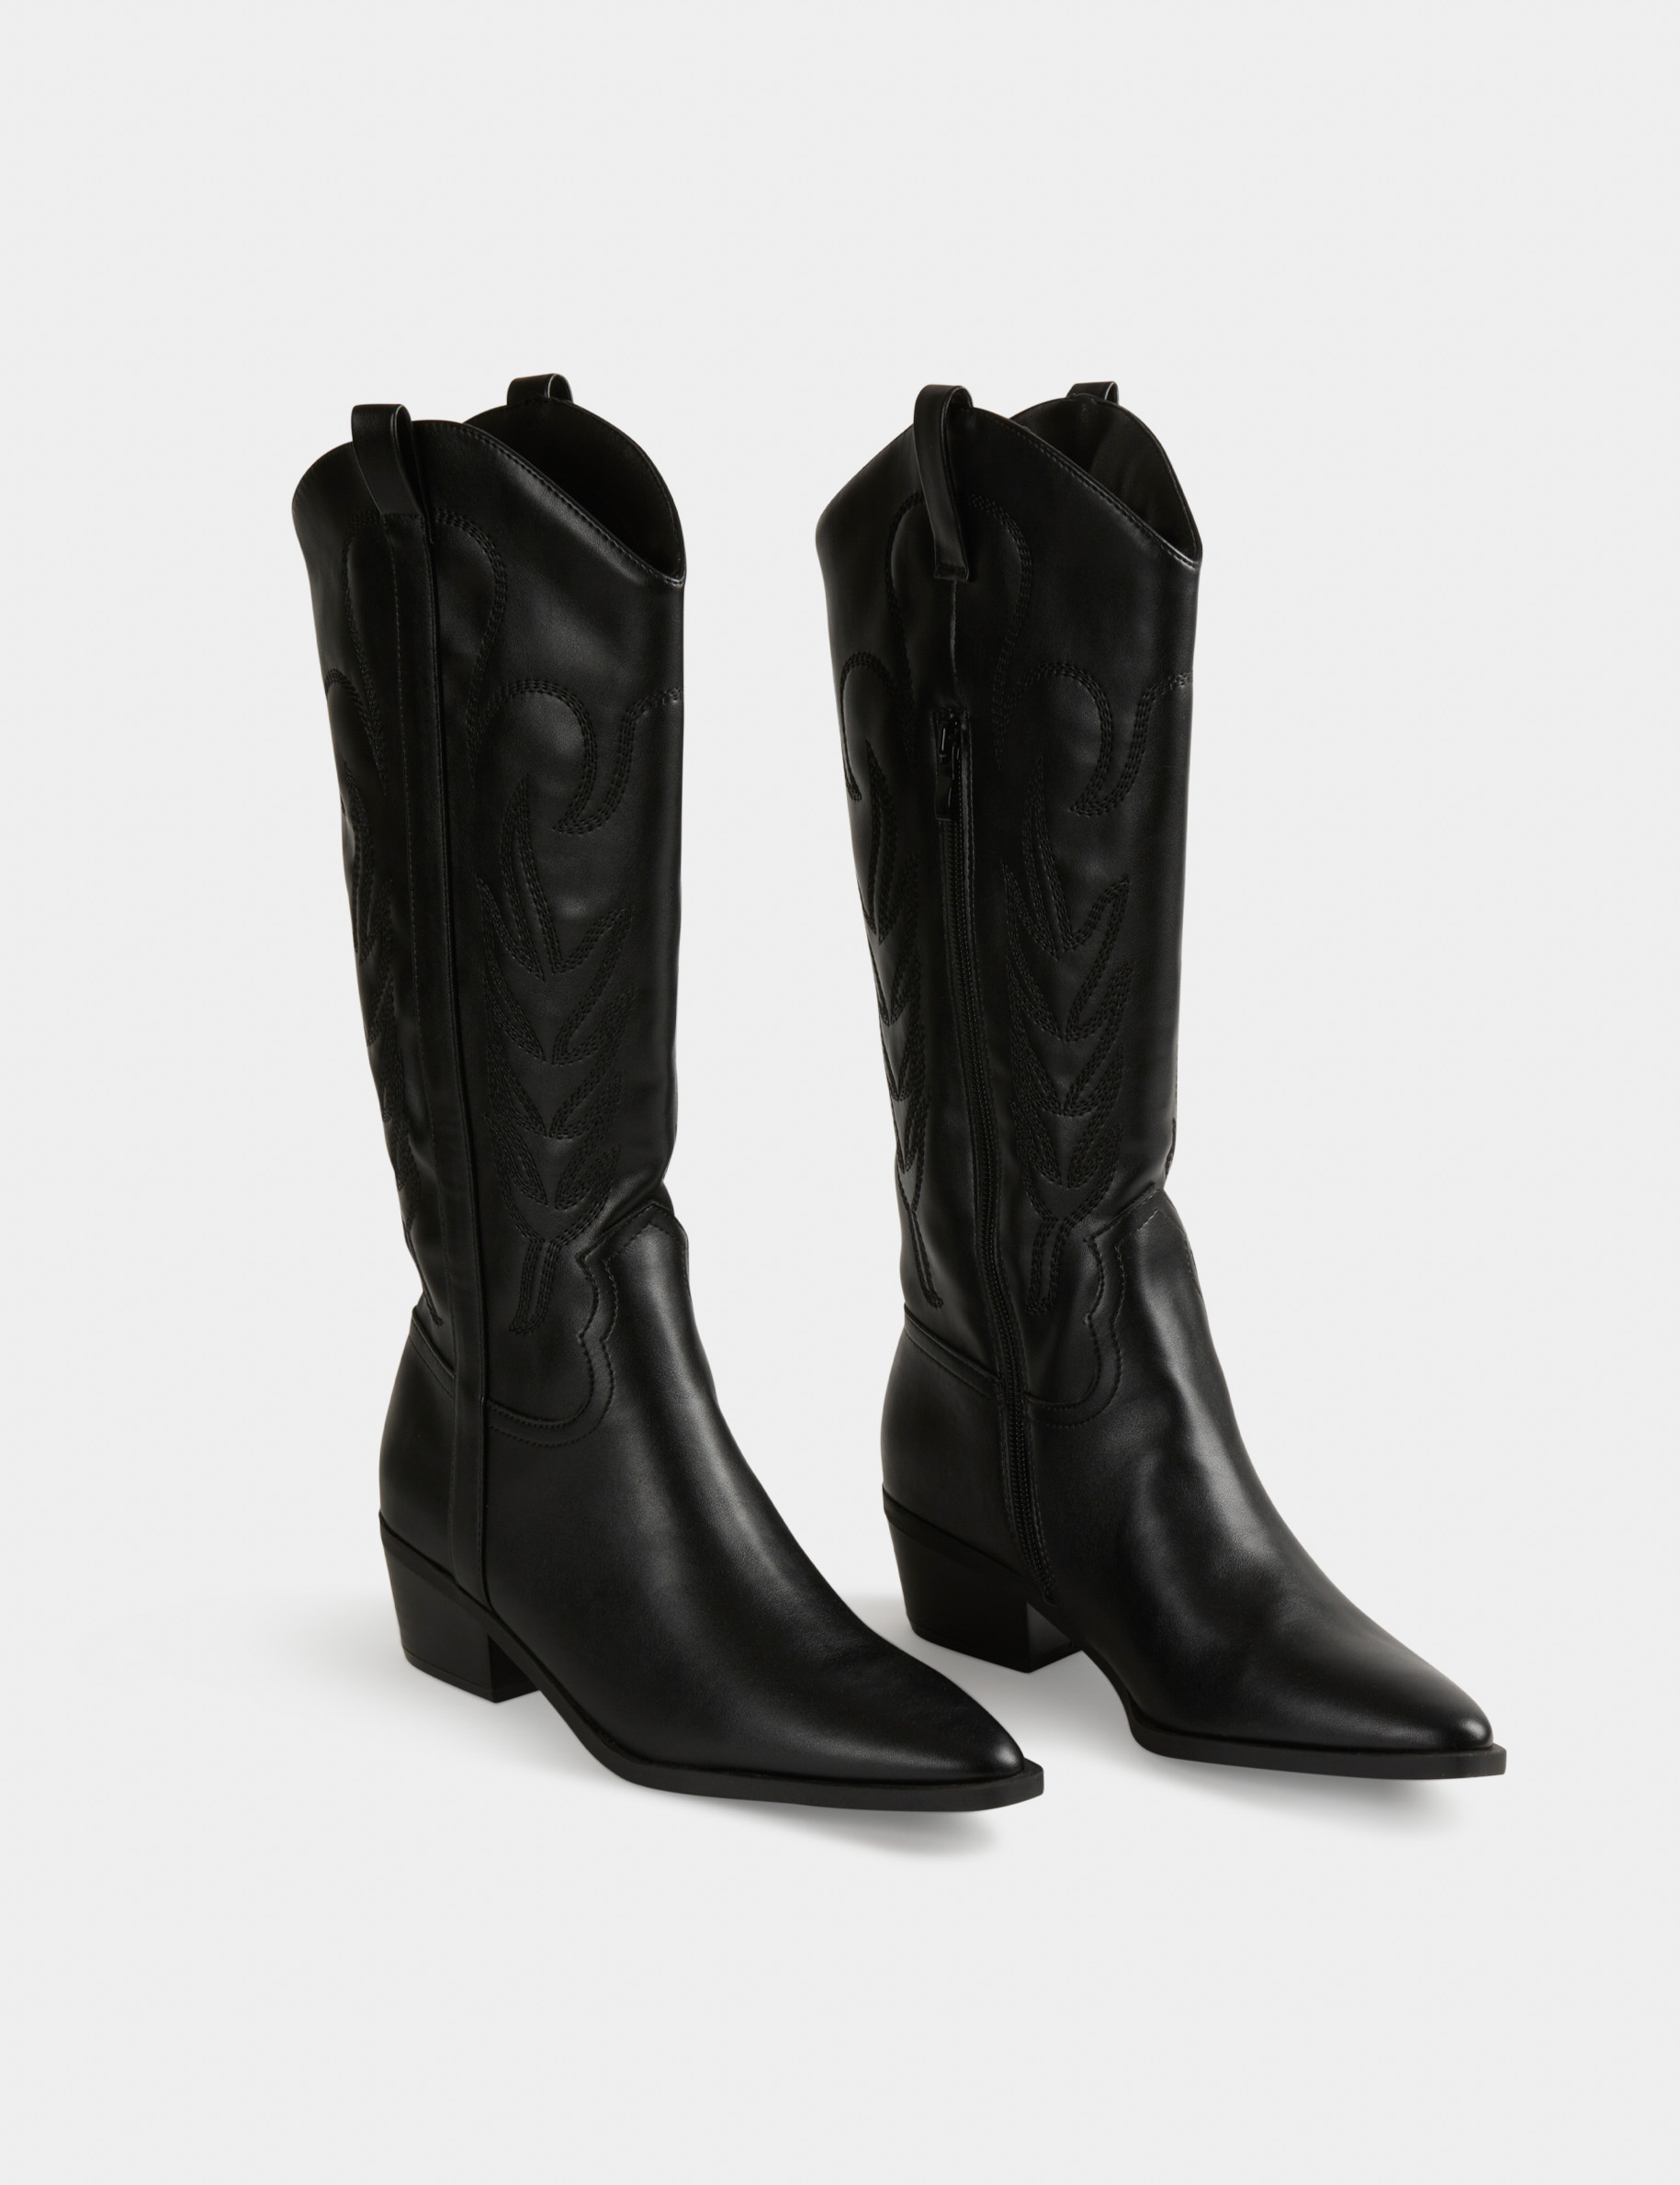 Zipped western style boots black ladies'